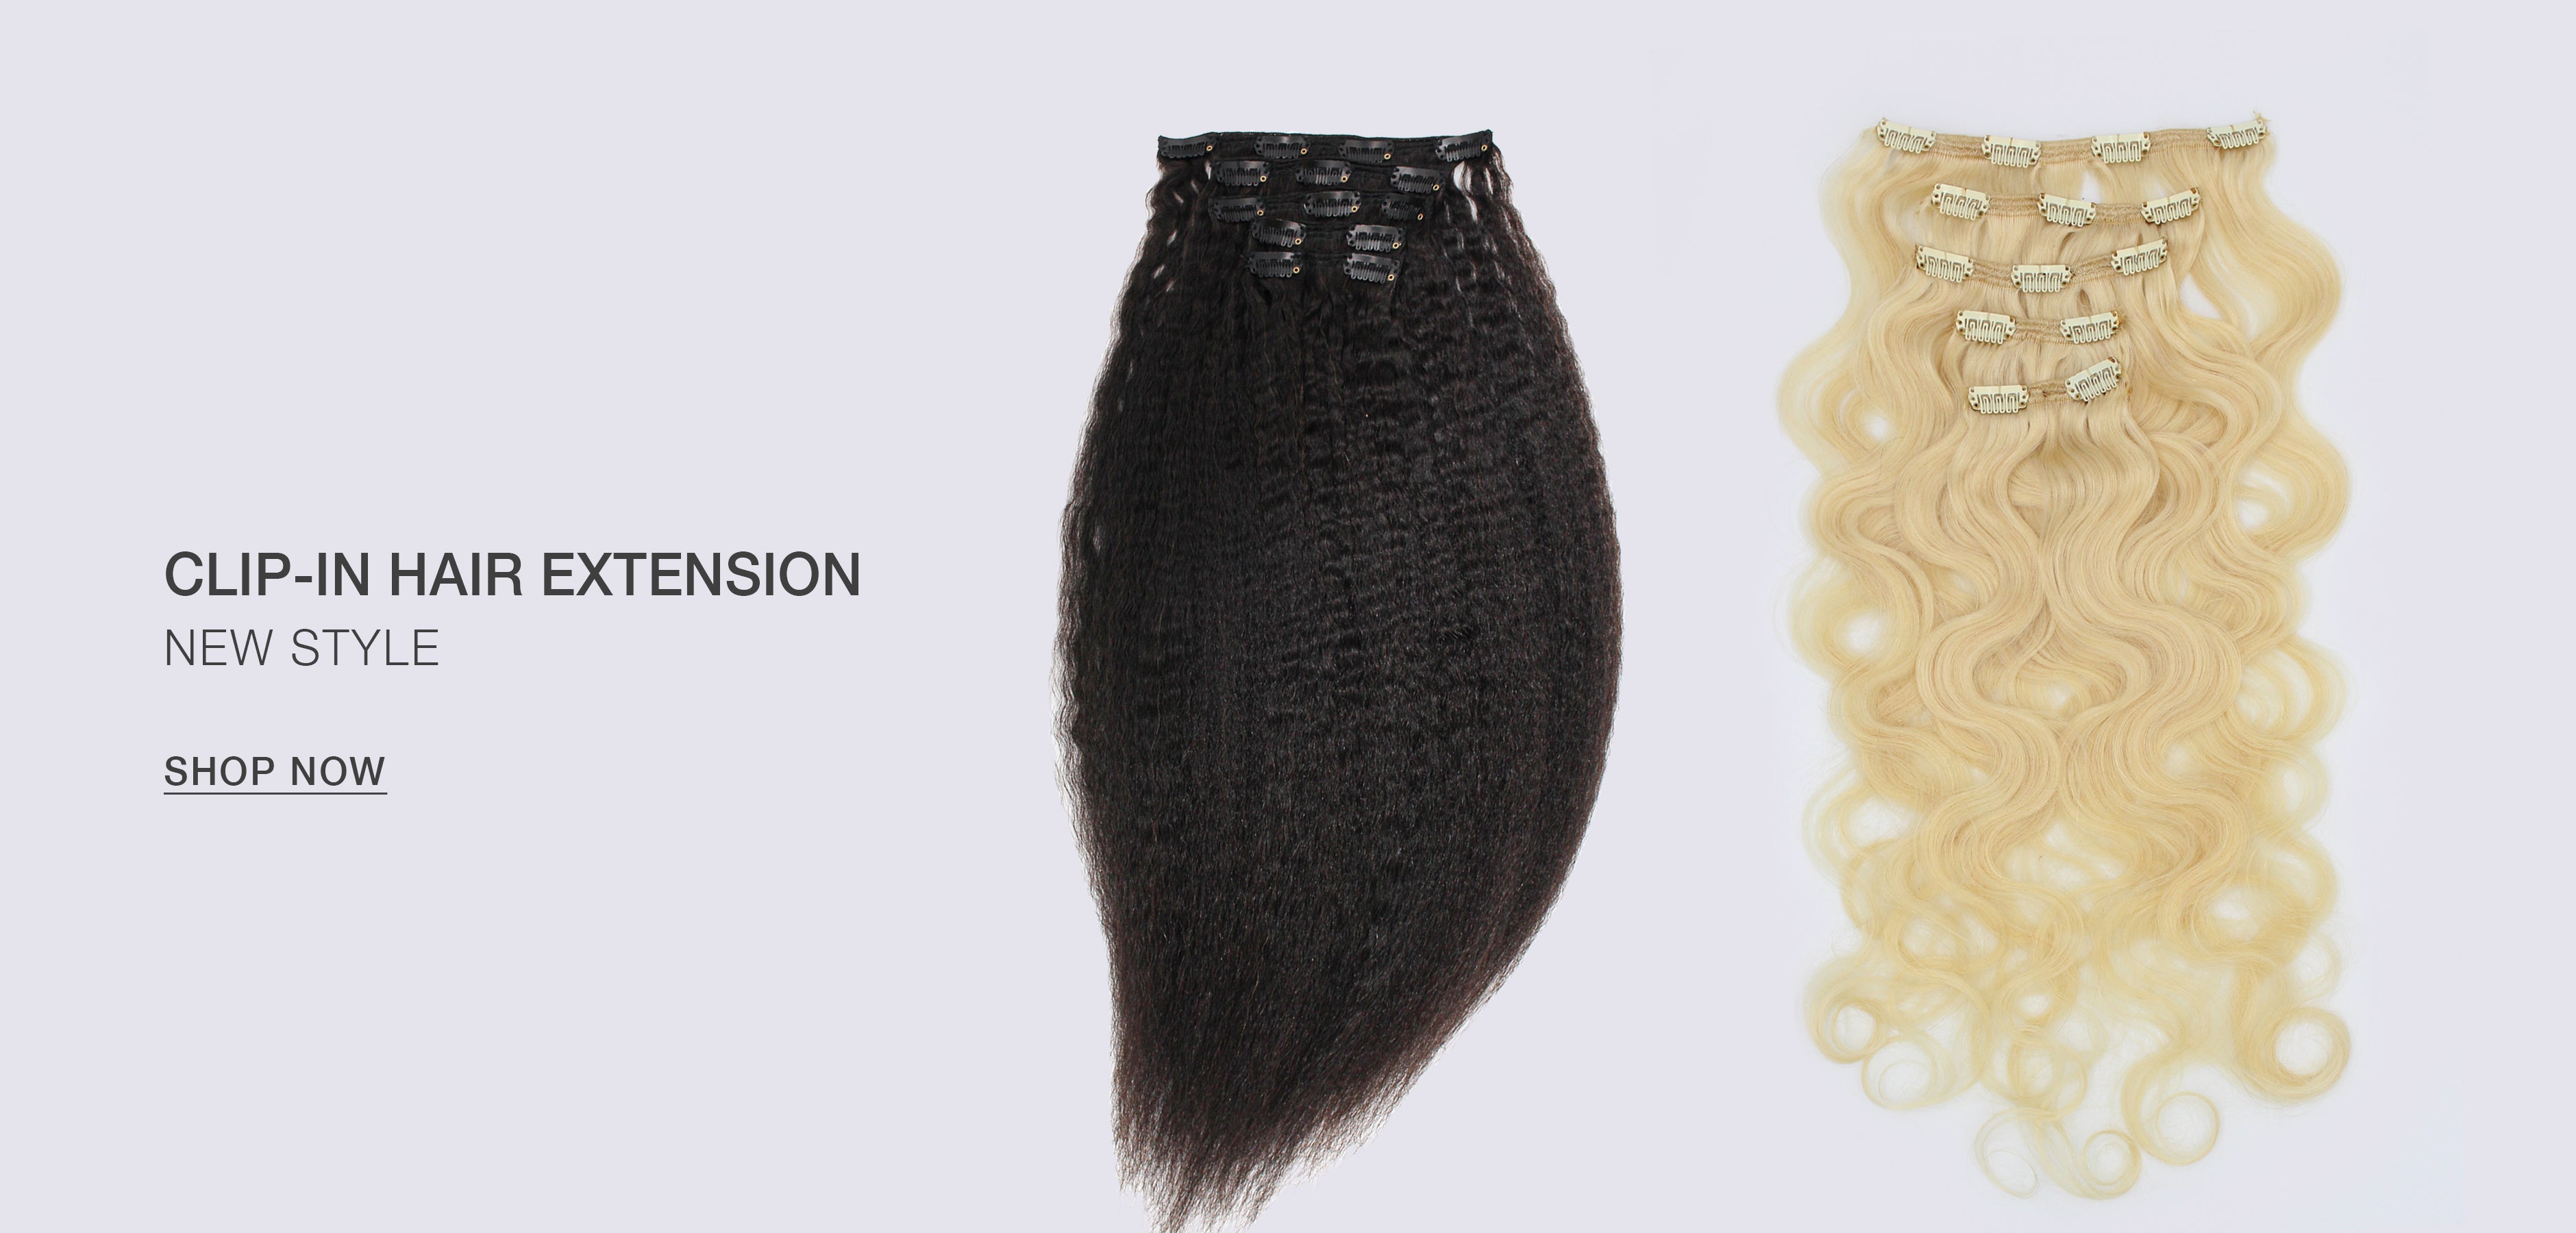 Clip-in Hair Extension - New Style